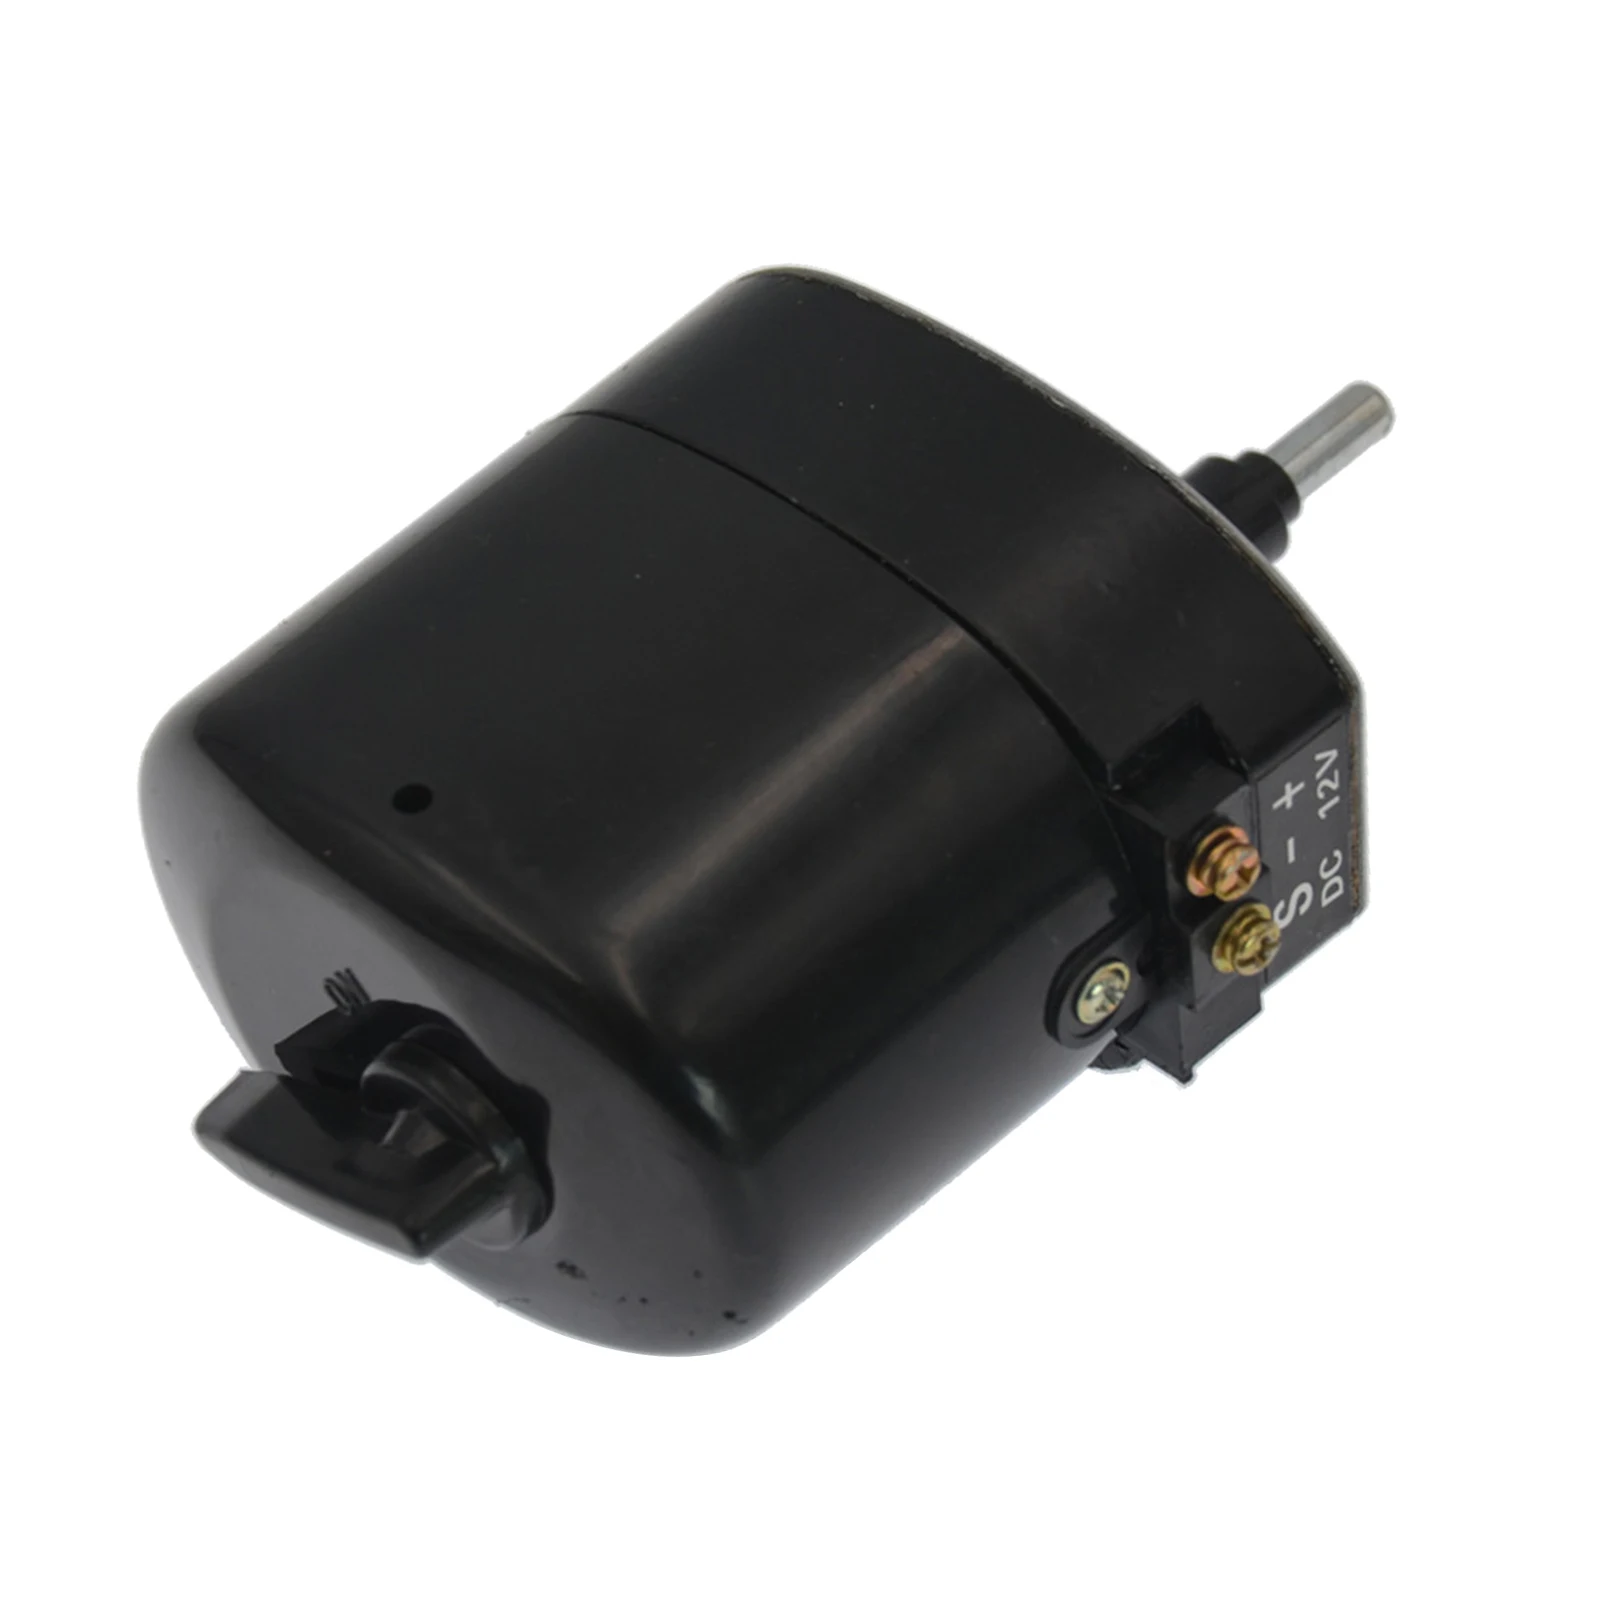 Wiper Motor - Car Auto Windshield Windscreen Wiper Motor Compatible with Willys Jeep Tractor 01287358 7731000001 12V